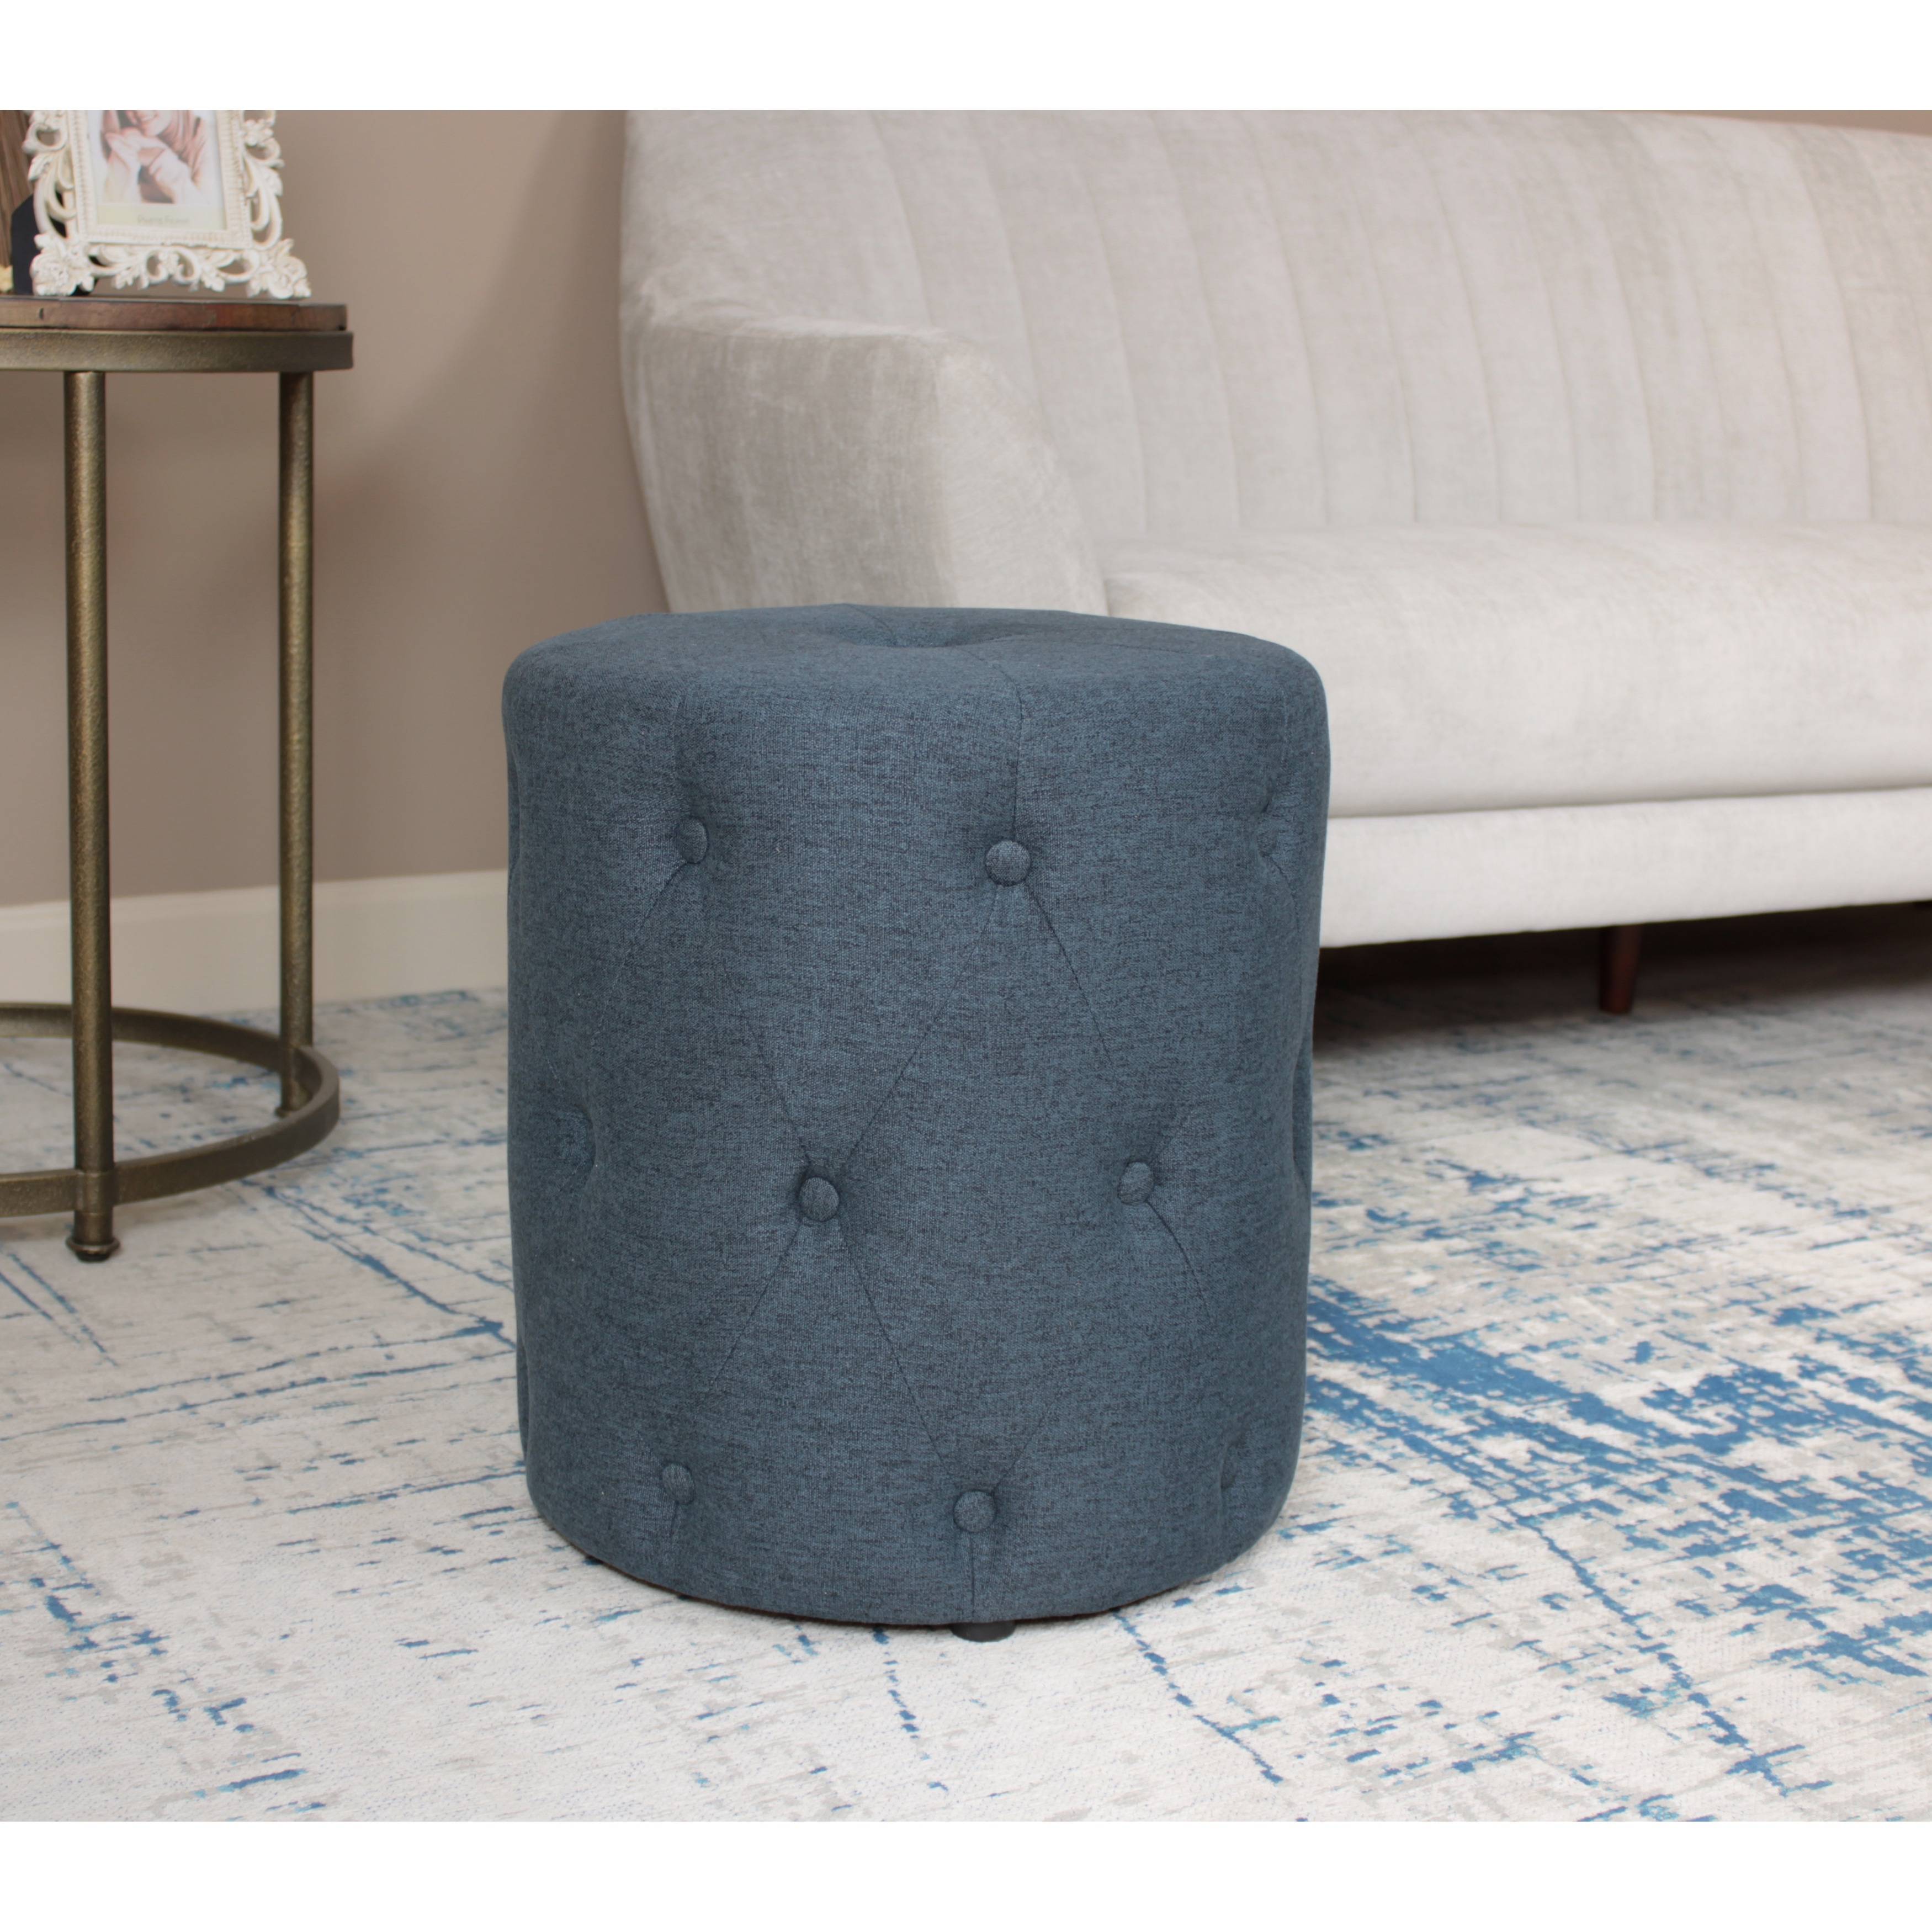 https://ak1.ostkcdn.com/images/products/is/images/direct/3e81276cd82d2636dbe80cd8471689d31a17184d/Simple-Cushion-Cylindrical-Foot-Stool-Button-Sofa-Chair-Makeup-Stool-Small-Step-Stool-Small-Round-Stool-Suitable-for-Bedroom.jpg